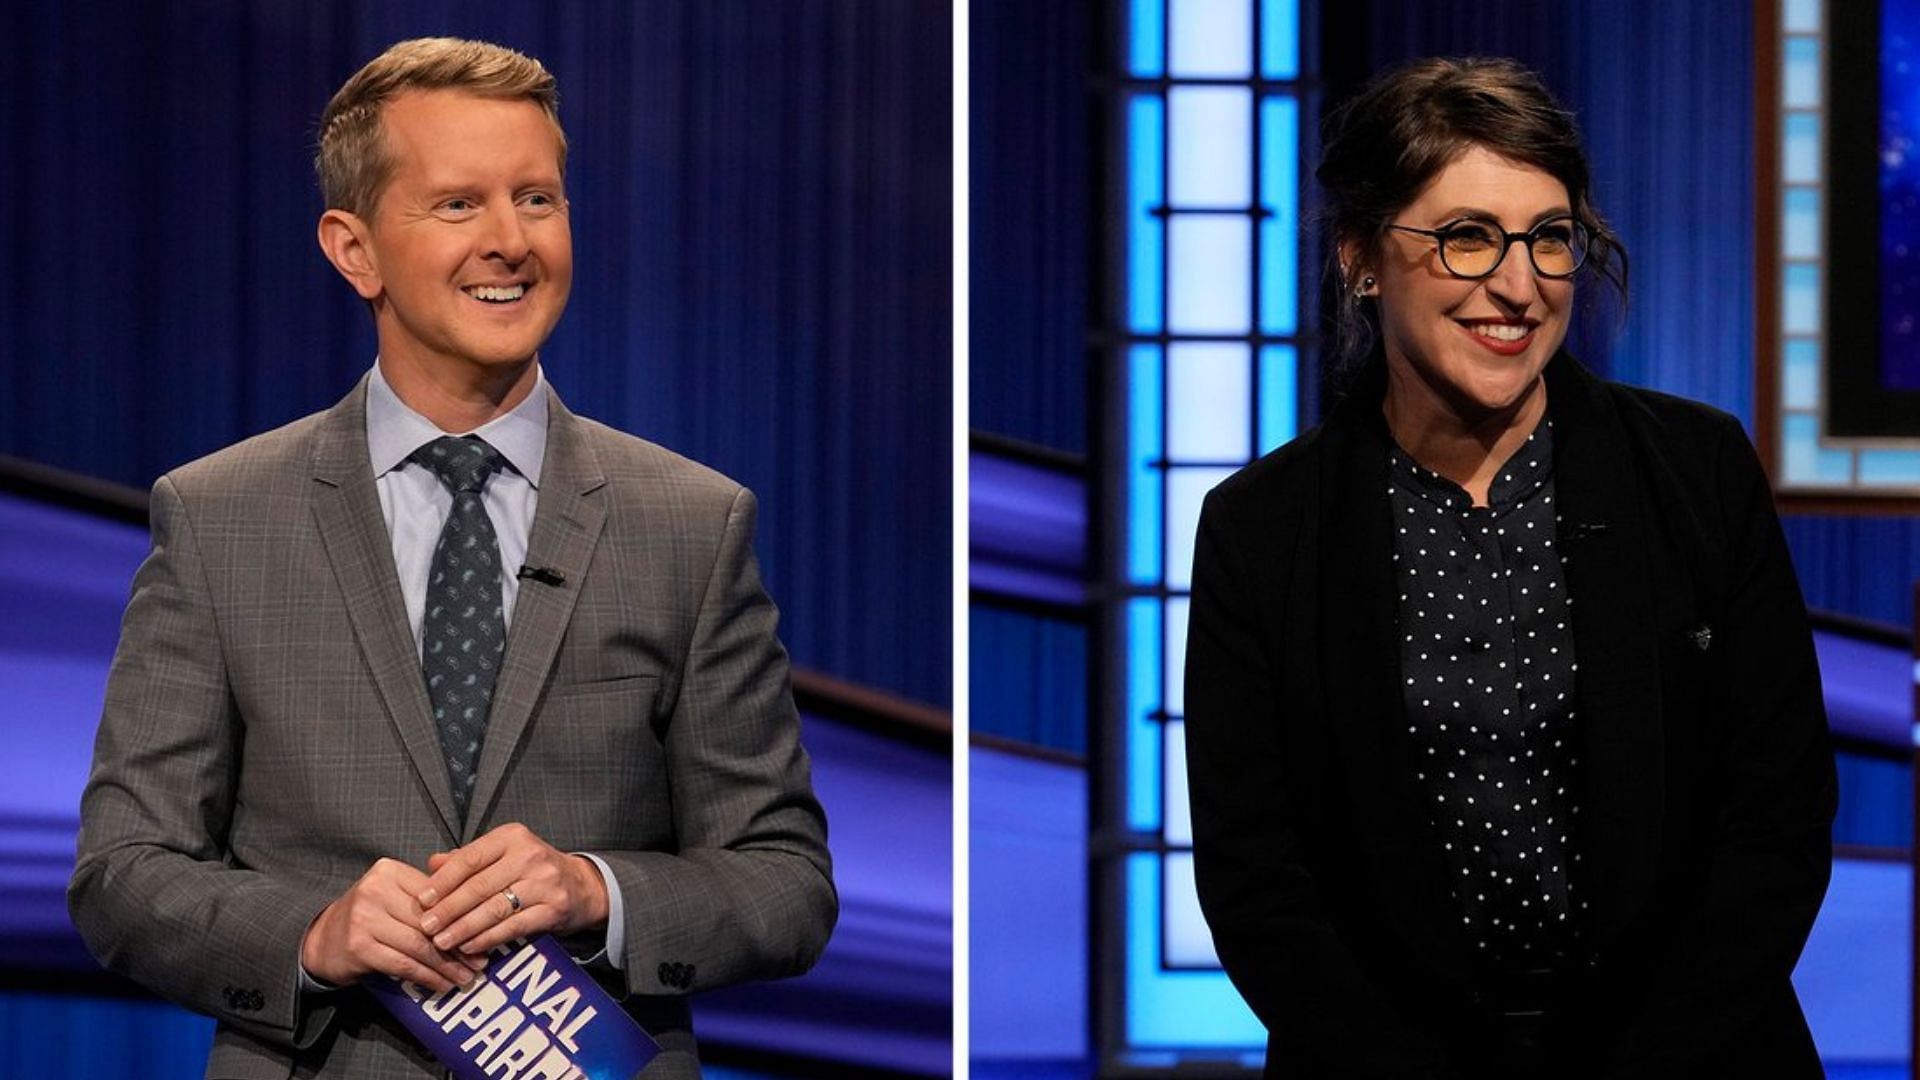 Ken Jennings and Mayim Bialik are Jeopardy! co-hosts